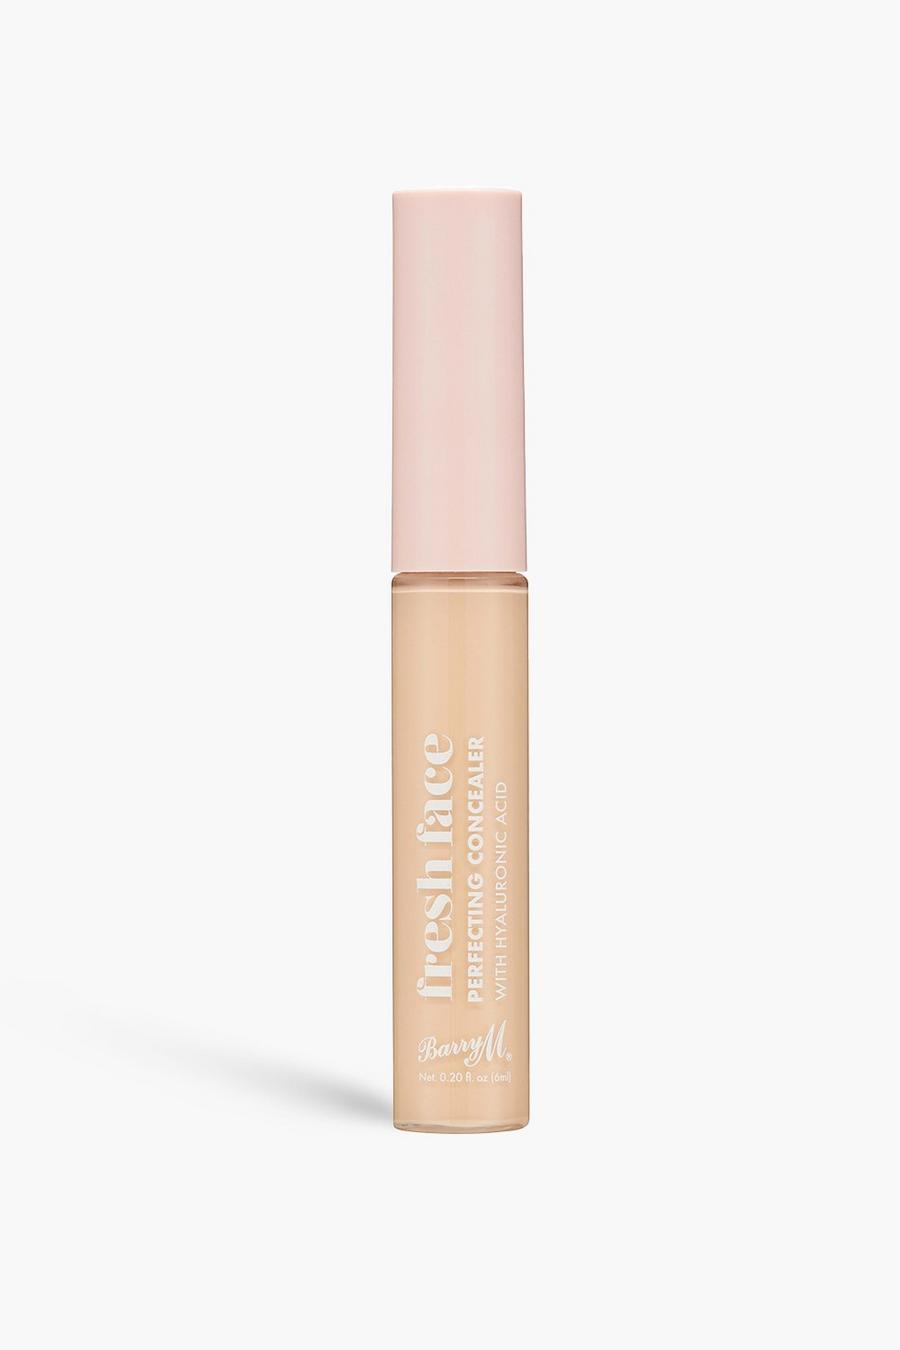 Cream white Barry M Fresh Face Perfecting Concealer 2